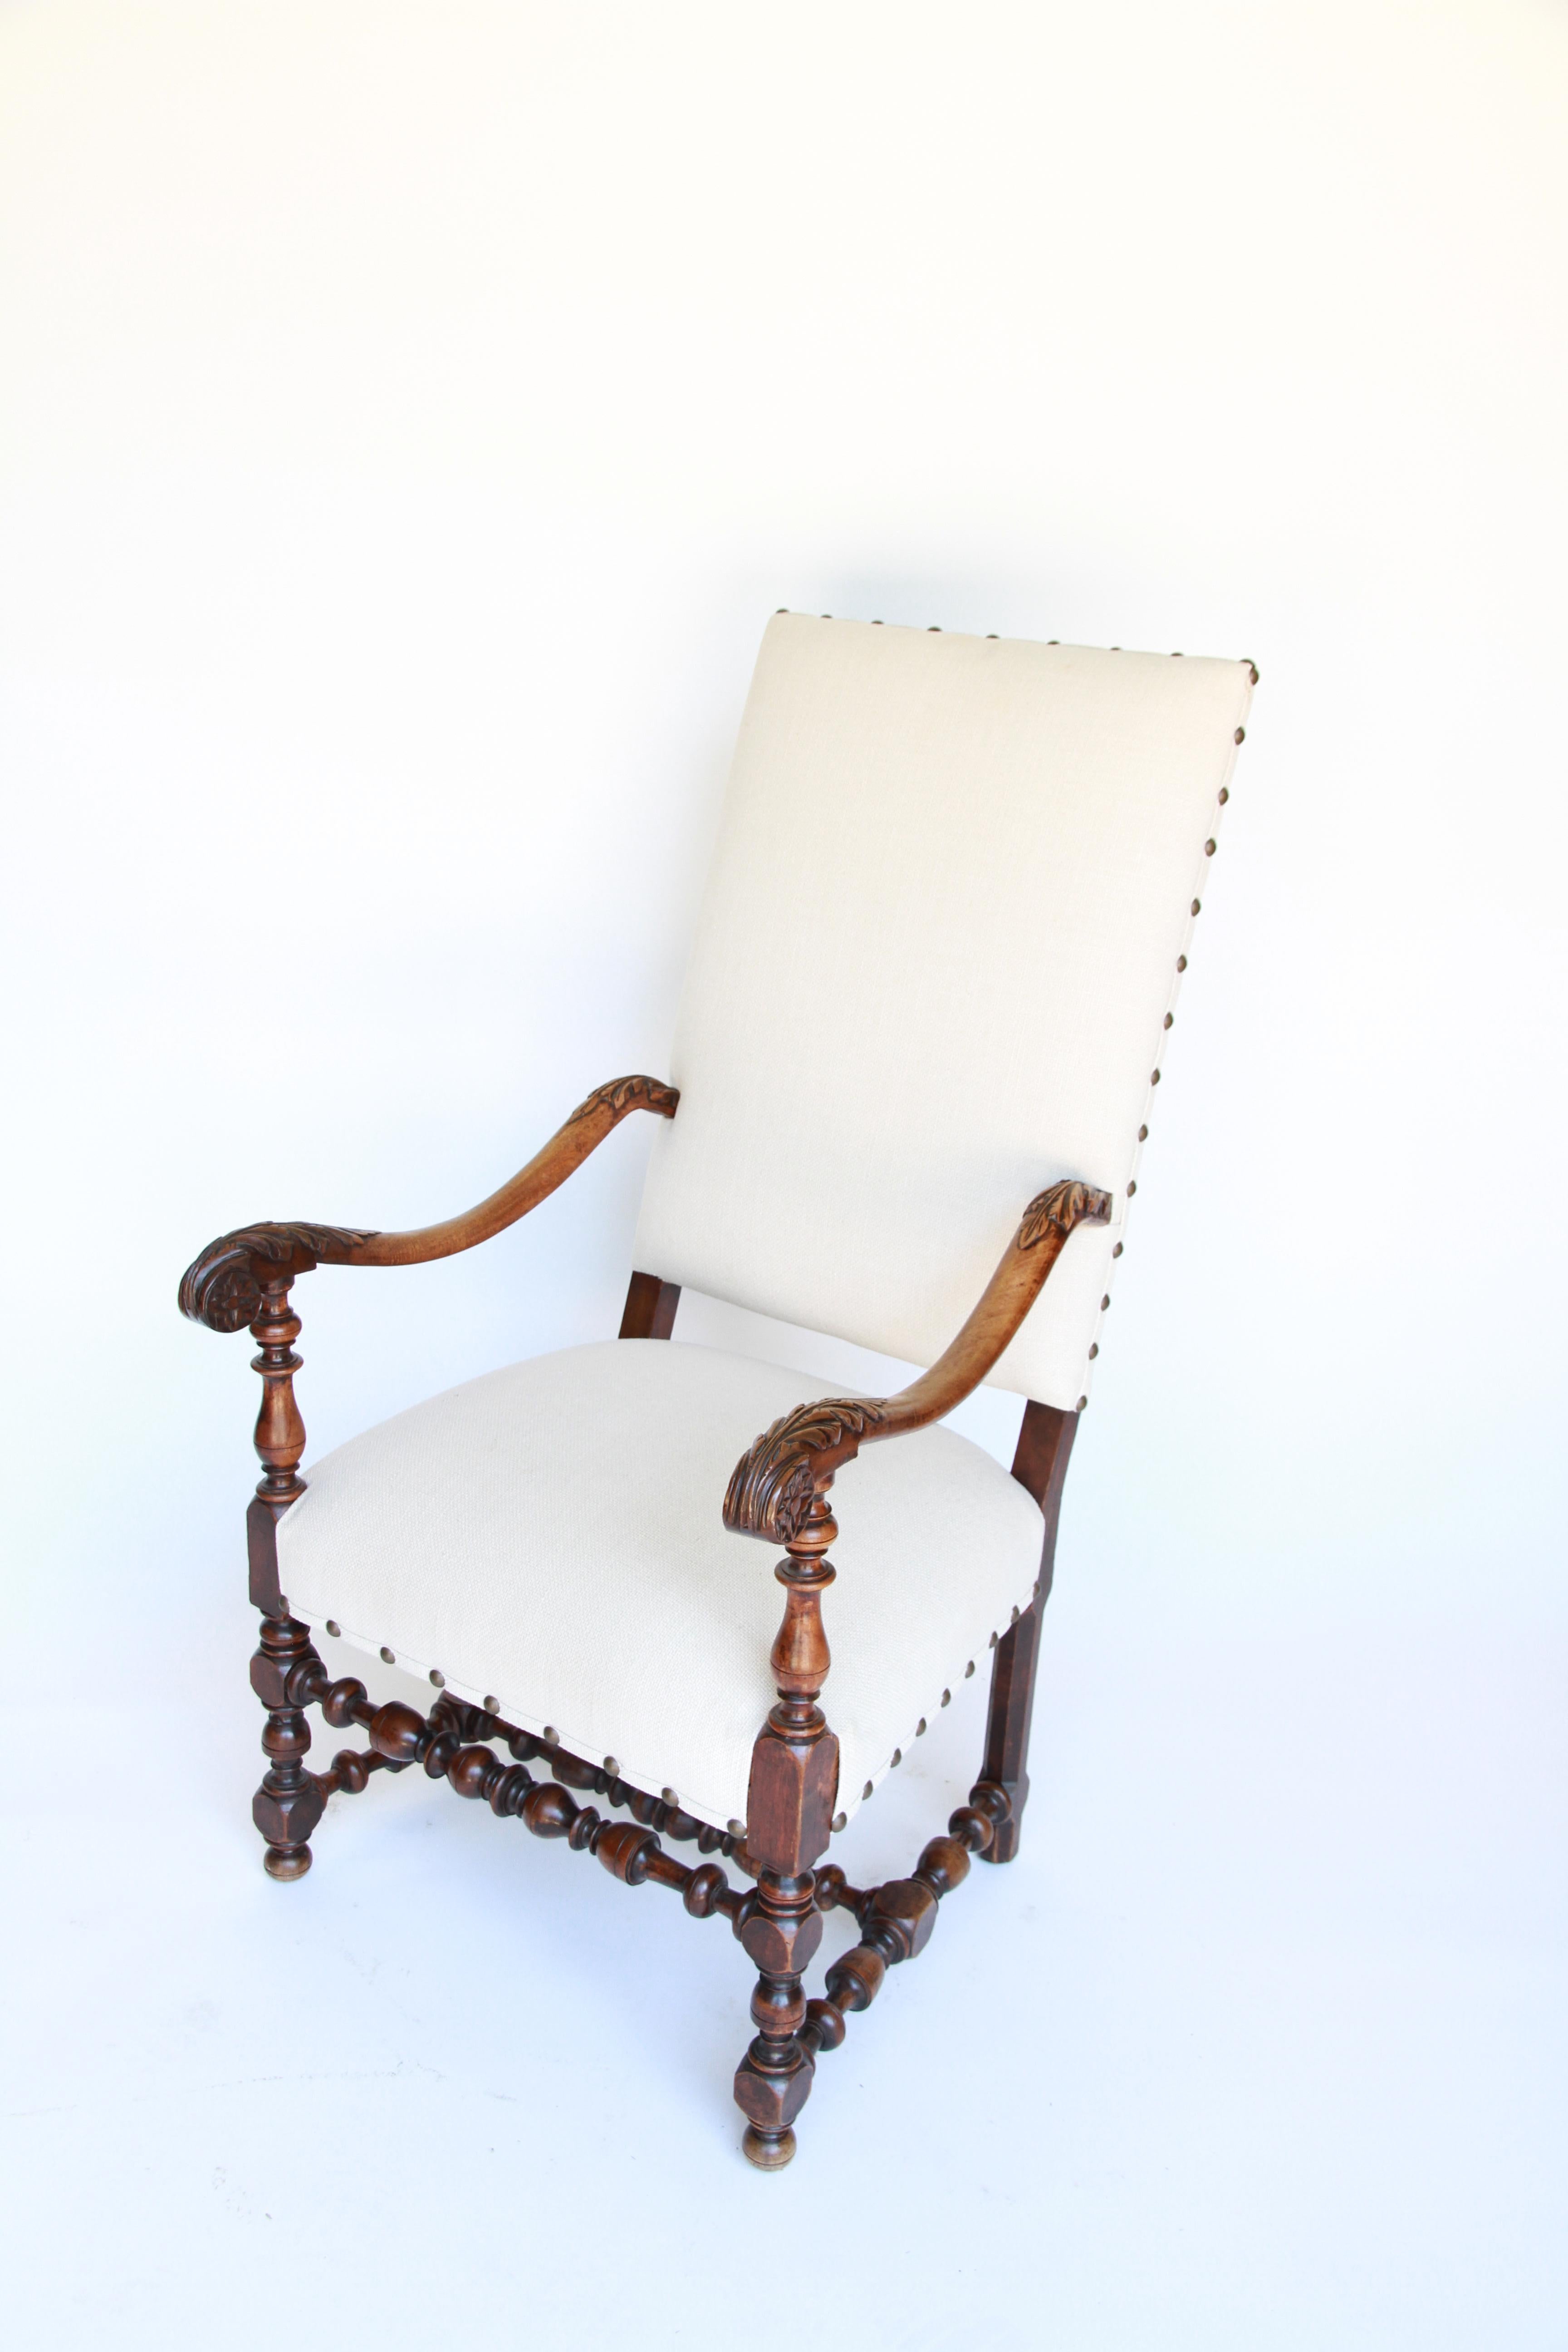 A 19th century French carved armchair. Each arm is beautifully carved with acanthus leaf detail, the legs and stretchers are turned wood. The chair is newly upholstered and has a nailhead trim.